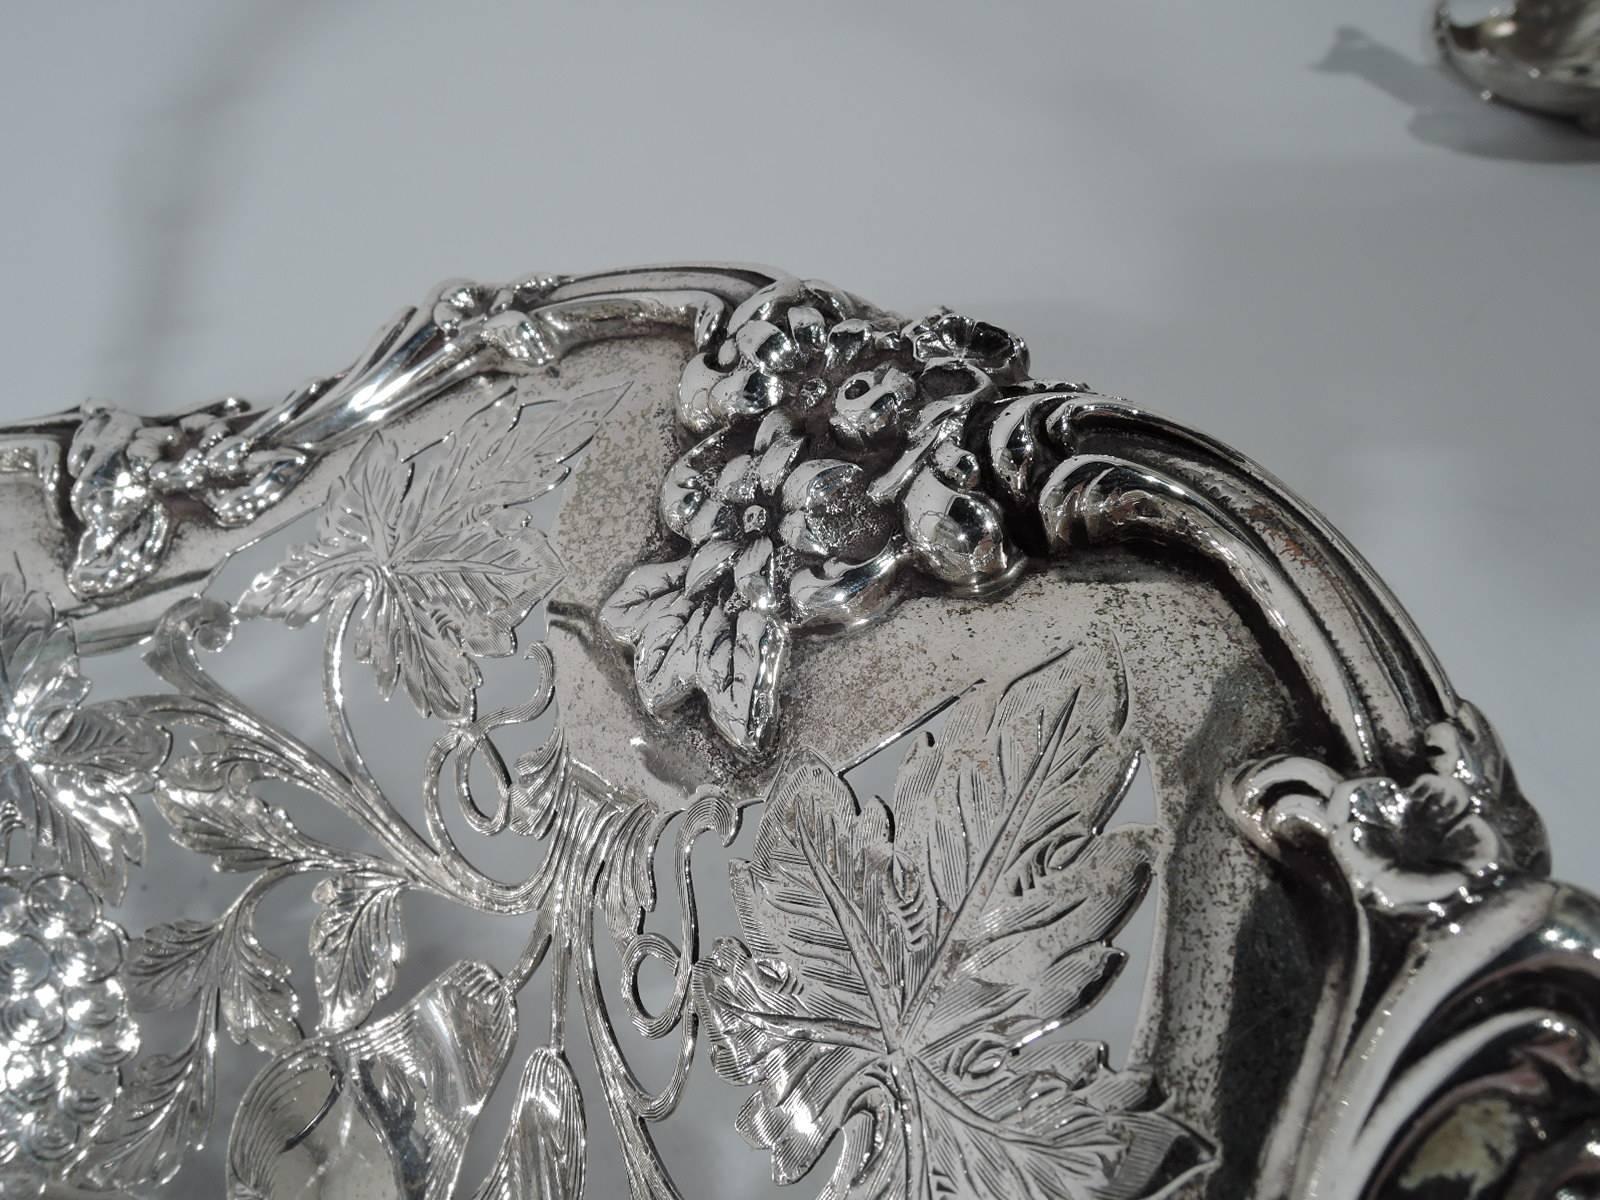 Antique American Sterling Silver Basket with Fruits and Flowers 1